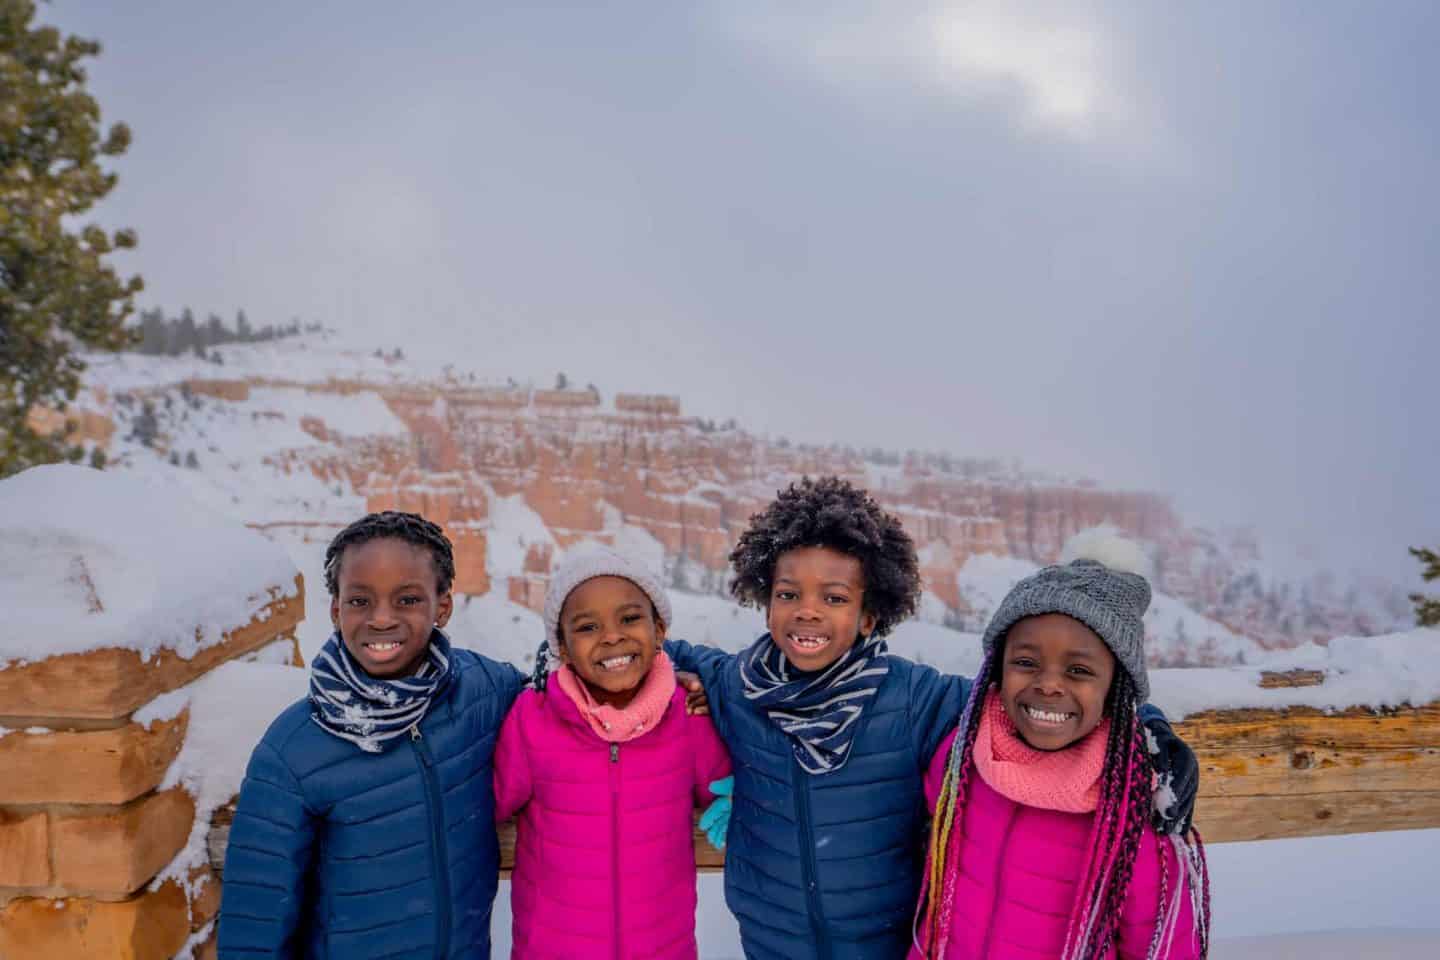 Four kids standing in front of a great snowy view.